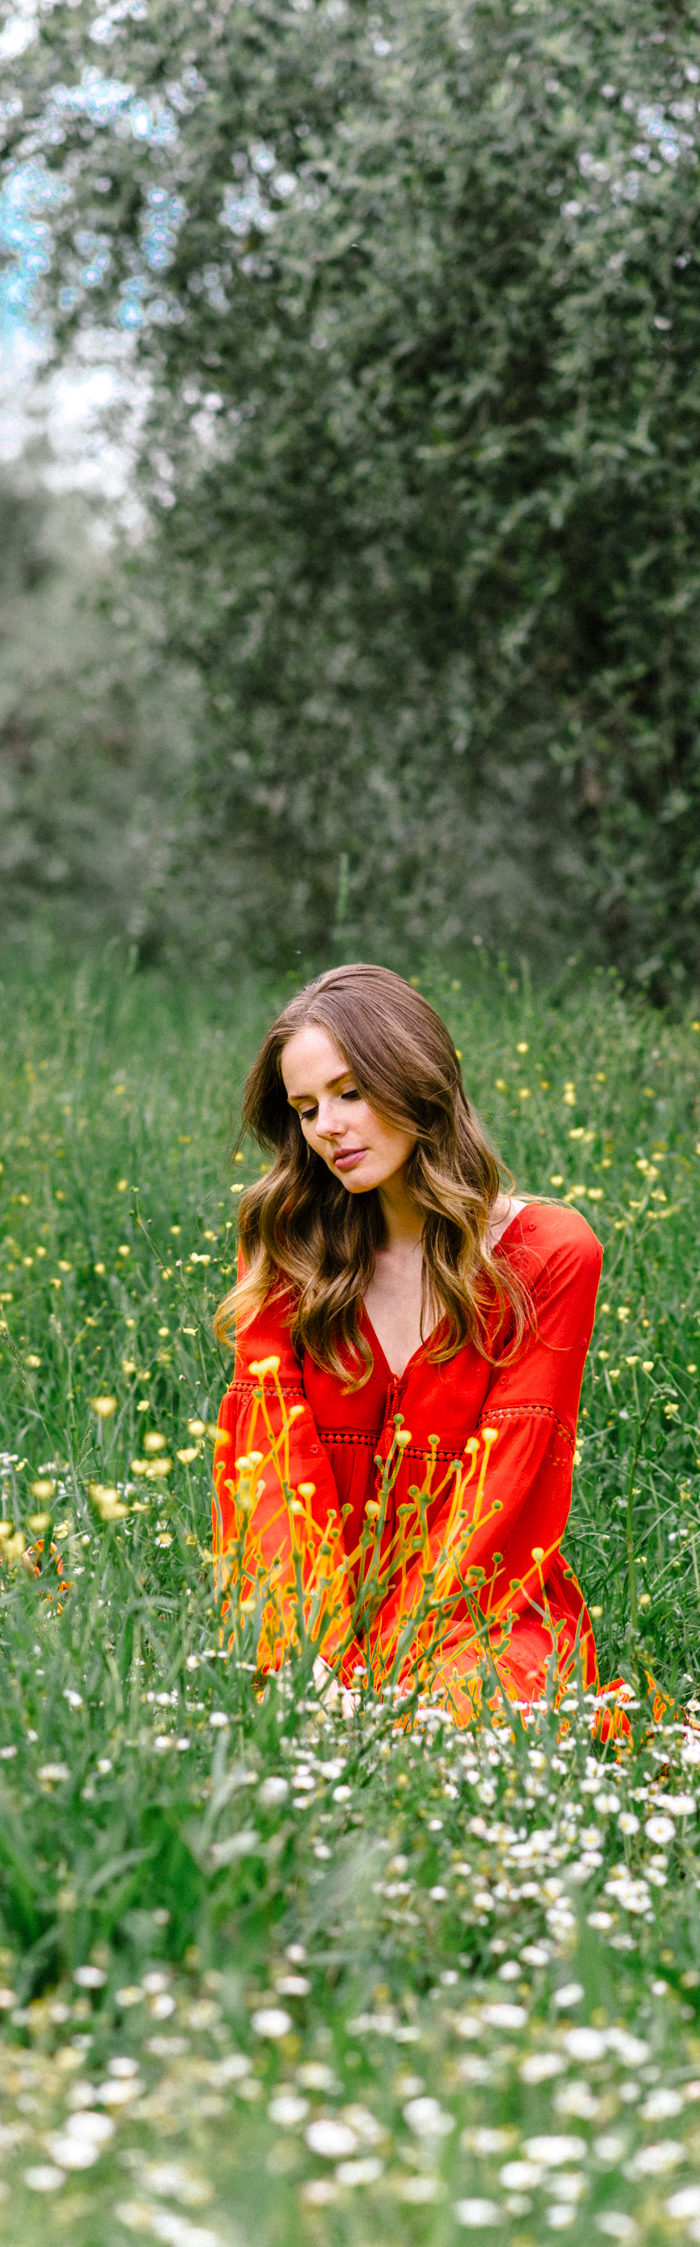 Alyssa Campanella of The A List blog shares her struggles with anxiety and depression